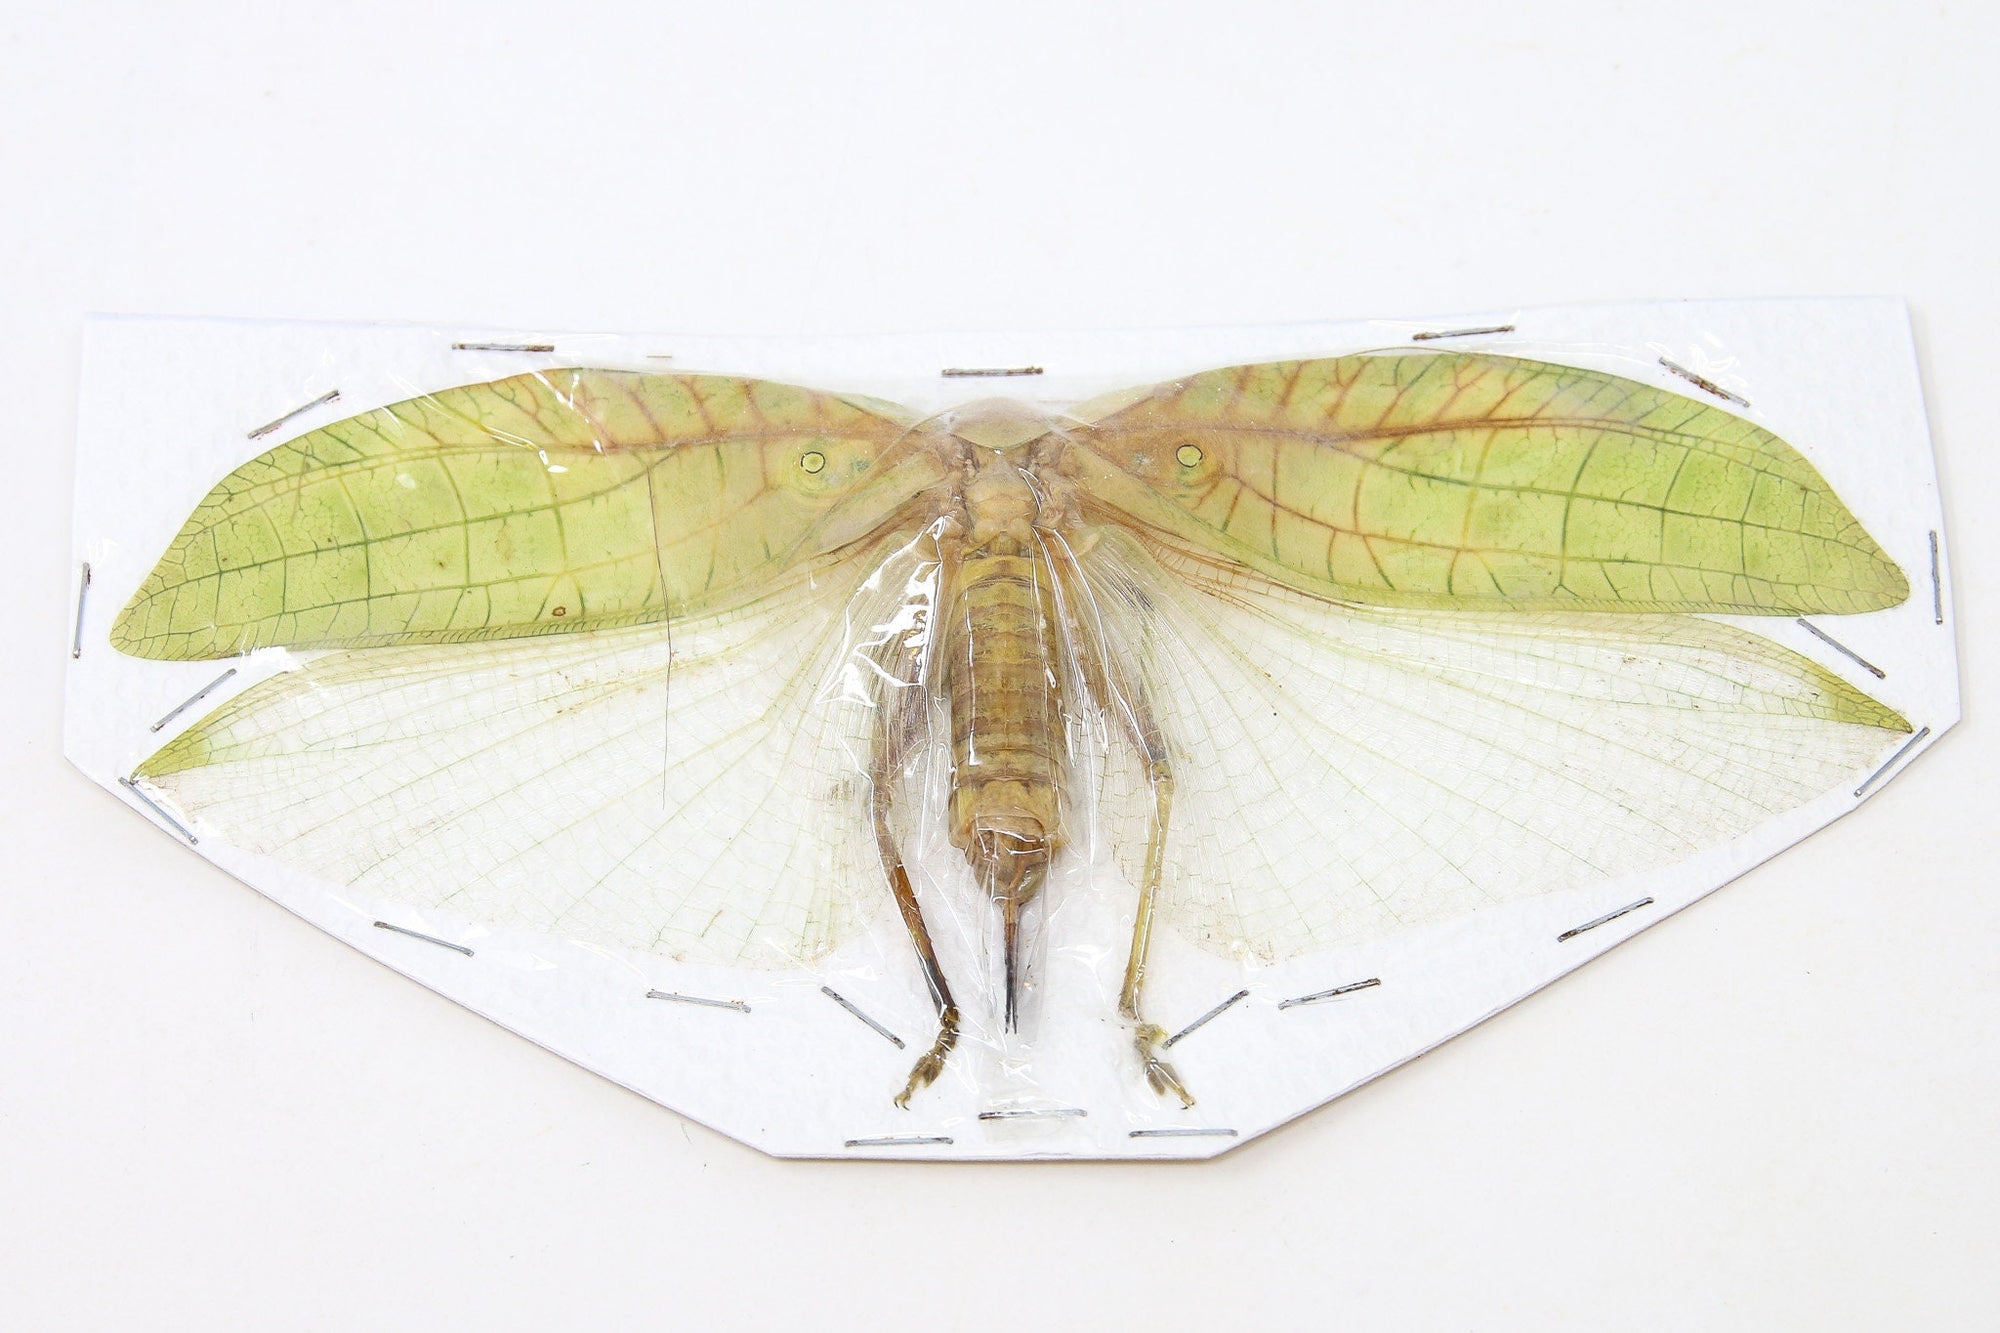 Katydid Insect Collection (Thailand) A1 Spread Specimen, Long-horned Grasshopper, Bush Cricket, Lot#23